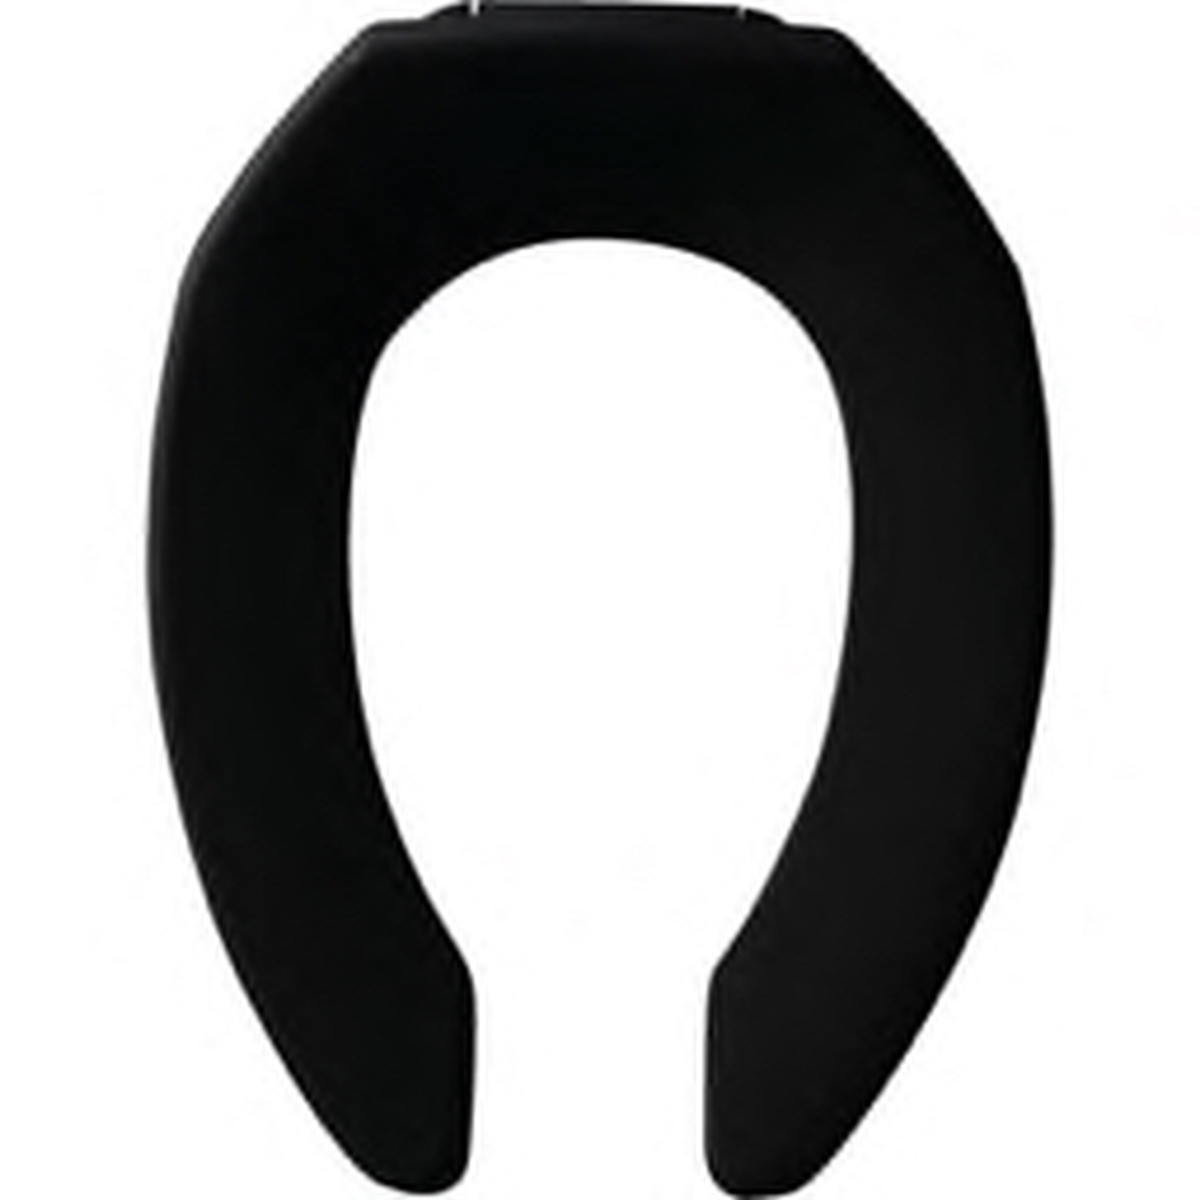 Picture of Bemis 1955SSCT047 Elongated Open Front Less Cover Toilet Seat with STA-TITE Check Hinge in Black